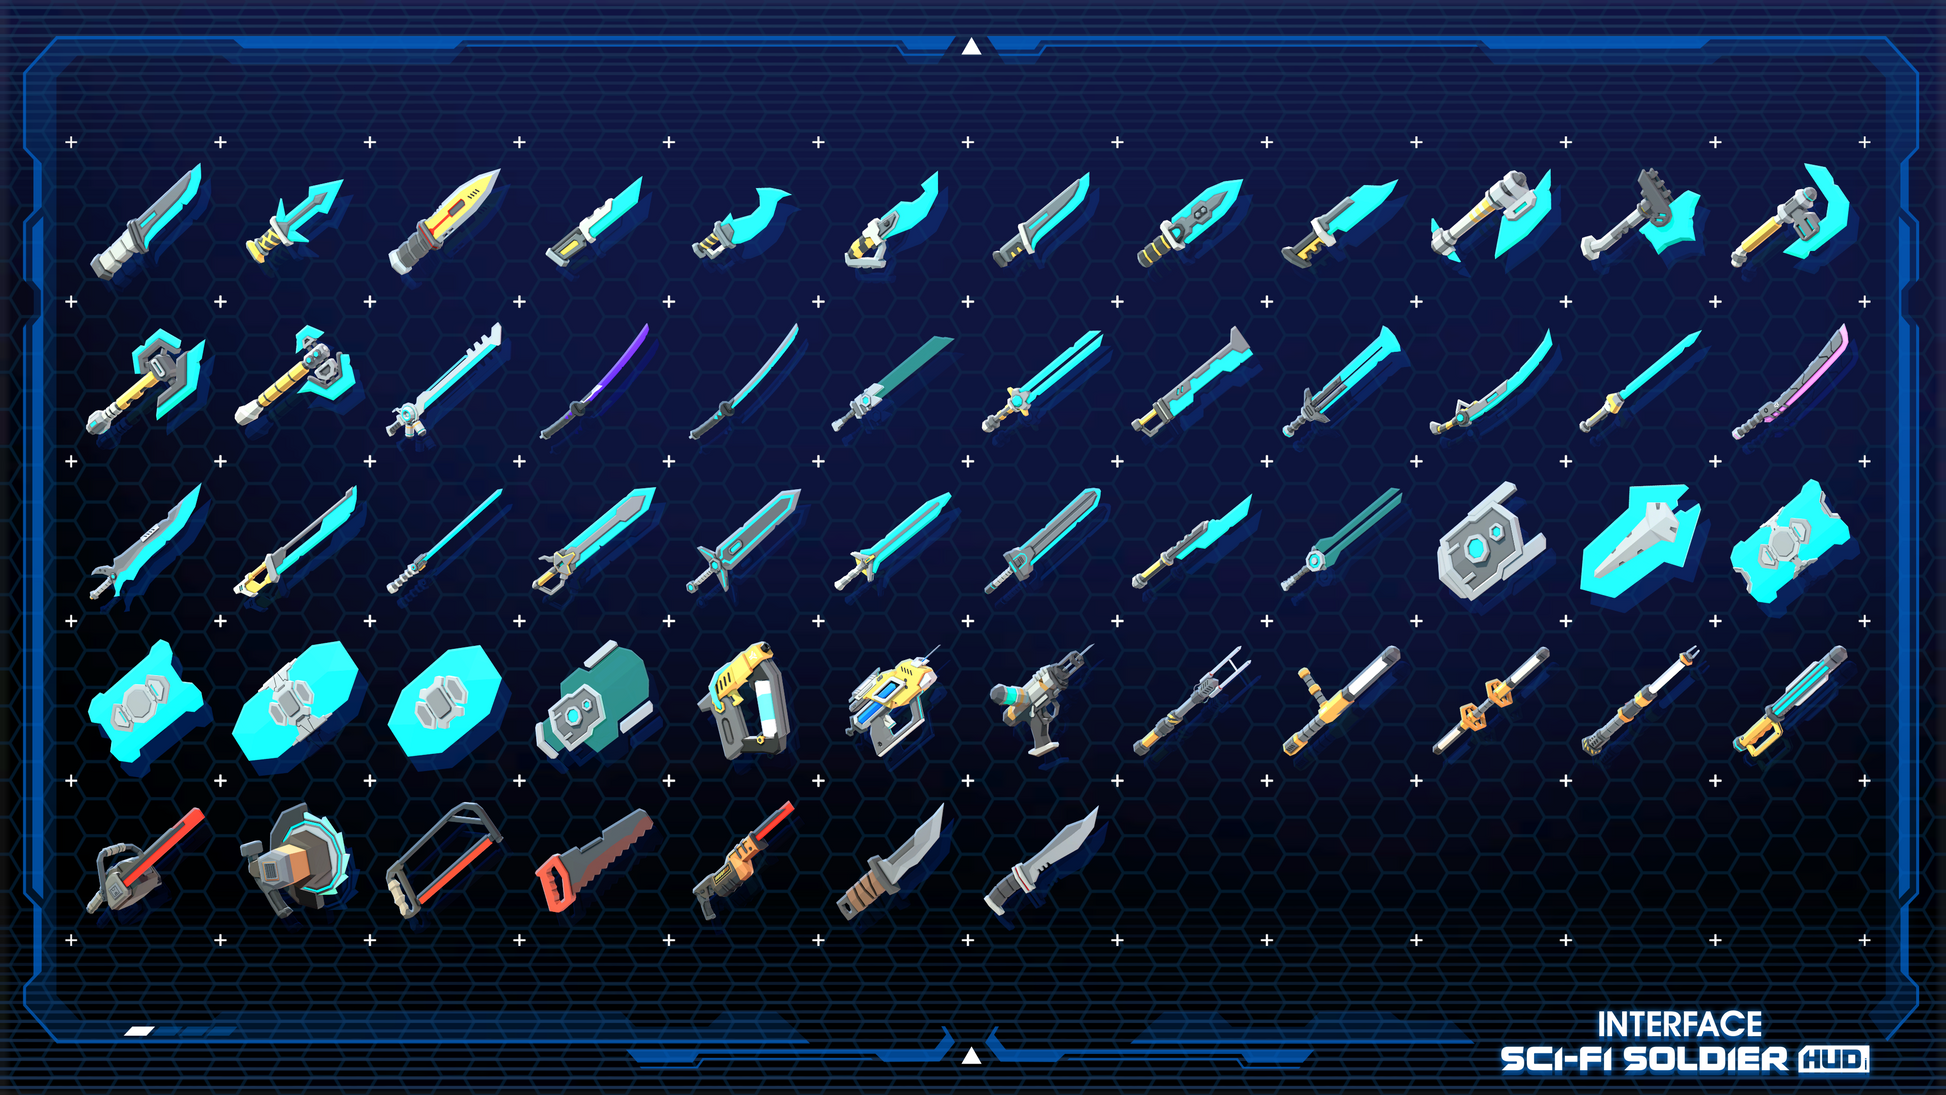 Melee weapon icons from the INTERFACE Sci-Fi Soldier HUD 3D game asset pack